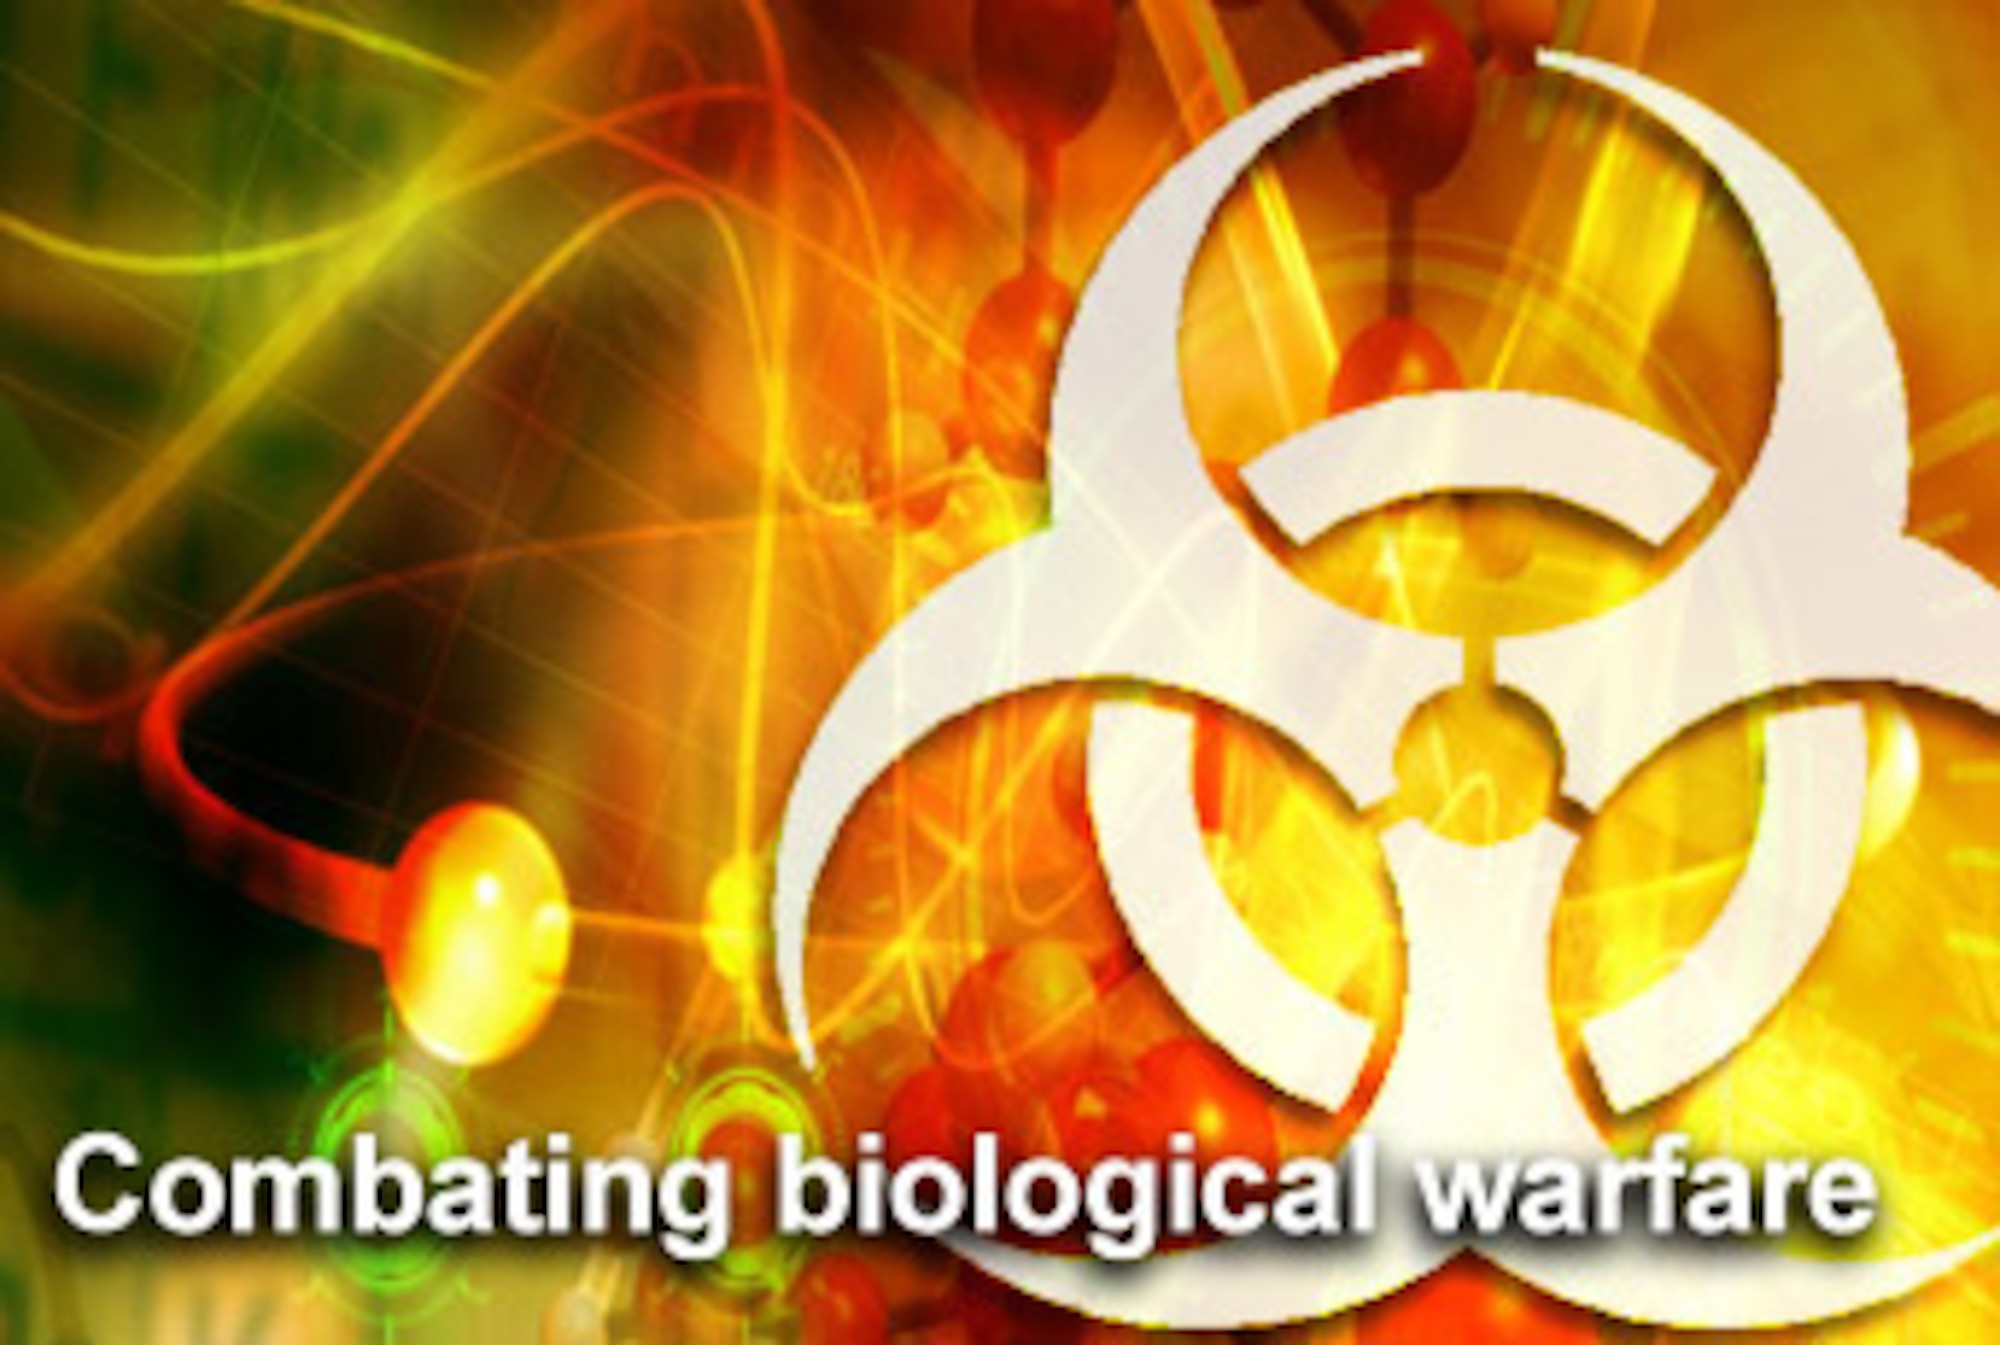 To help Air Force bases respond better to biological threats, Air Force officials have approved a new Counter-Biological Warfare Concept of Operations and Air Force Instruction. (U.S. Air Force graphic/Mike Carabajal)